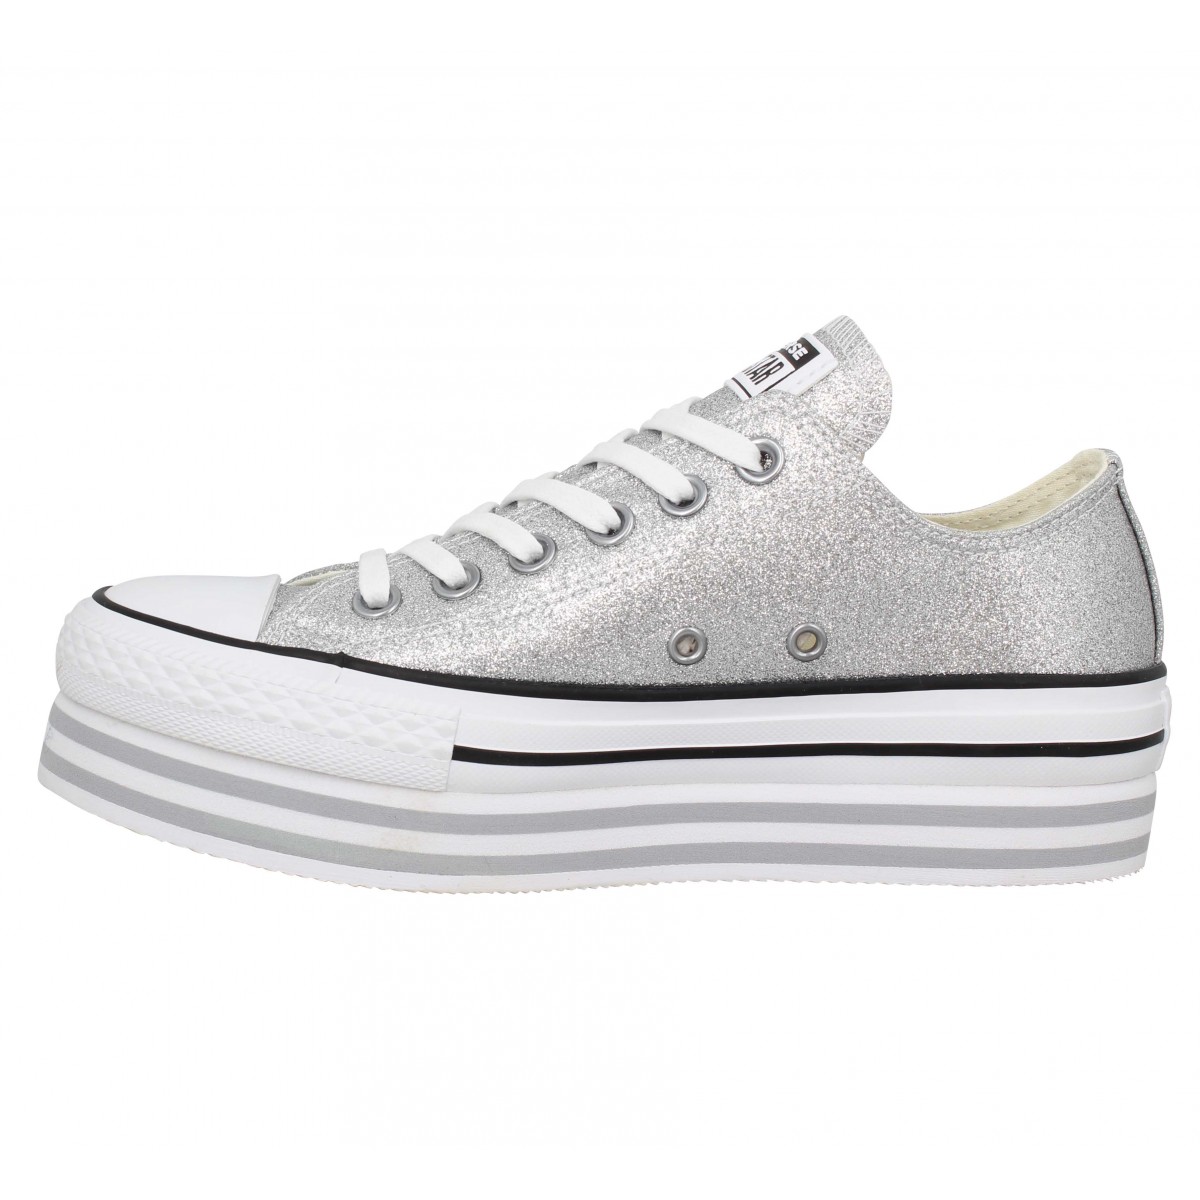 Chaussures Converse chuck taylor all star platform layer toile ...